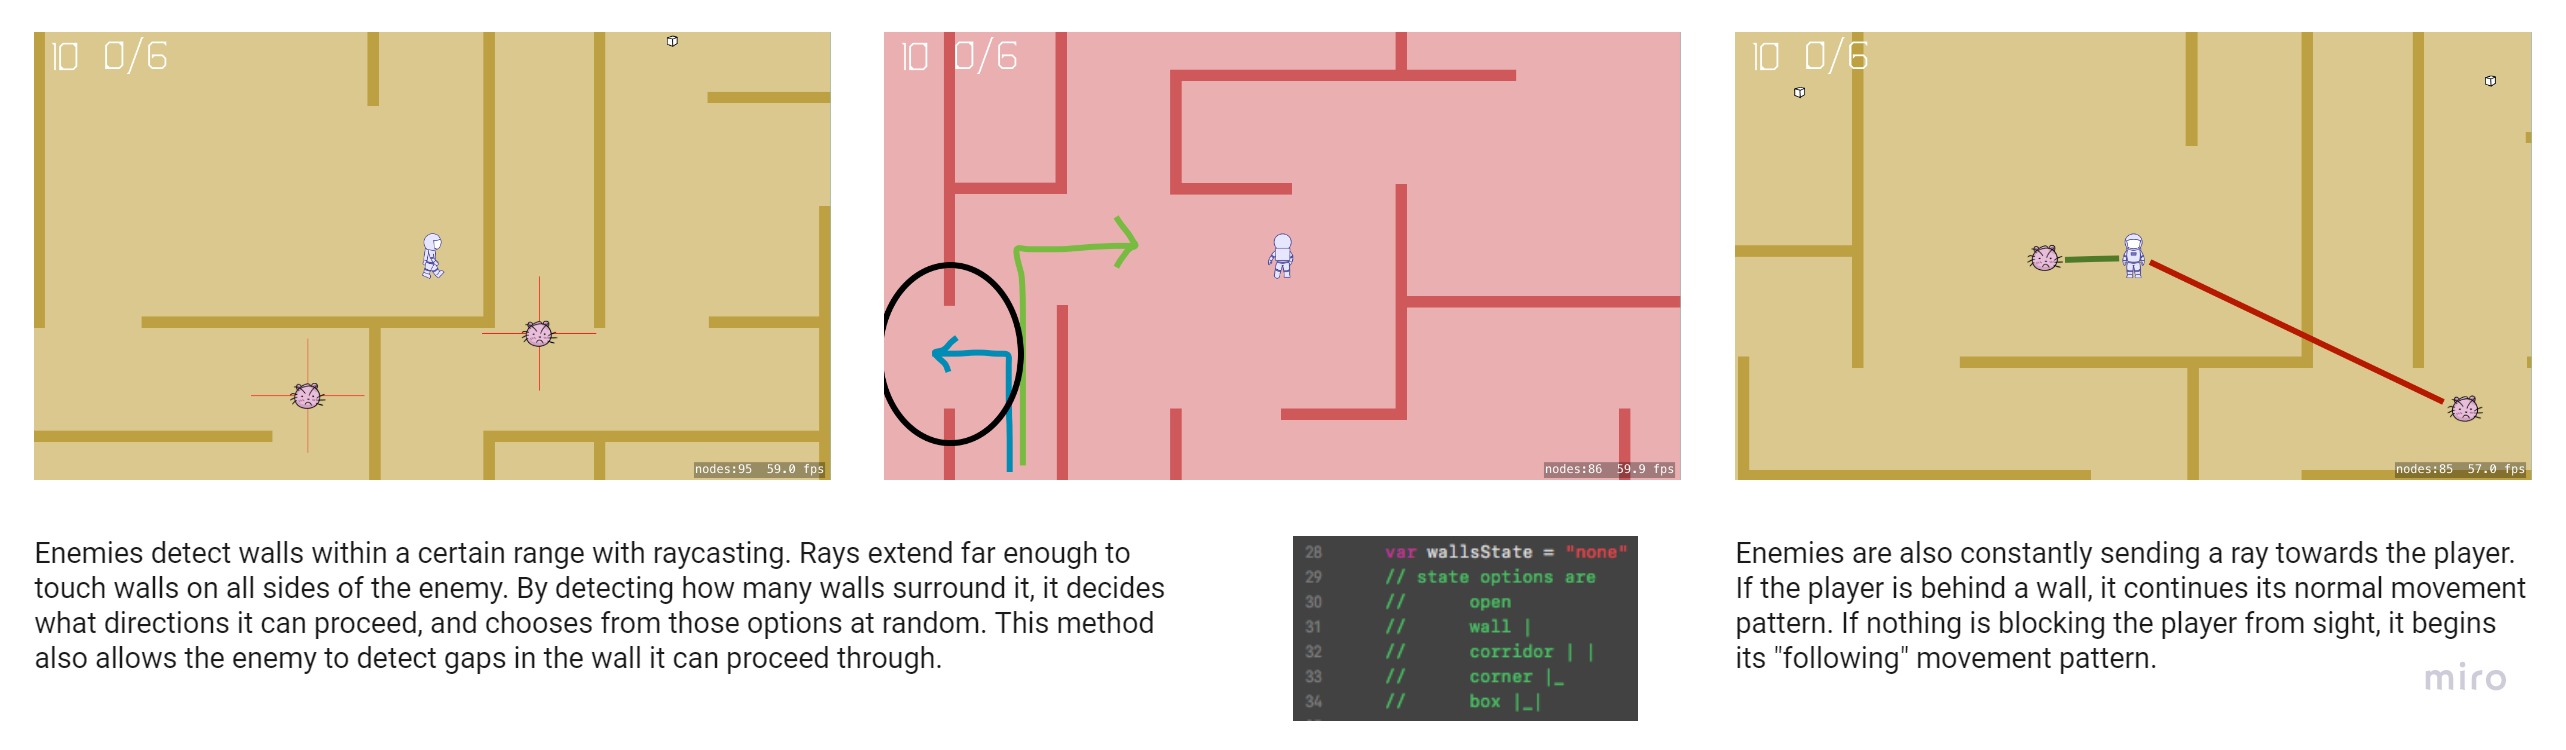 Graphic showing enemy pathfinding